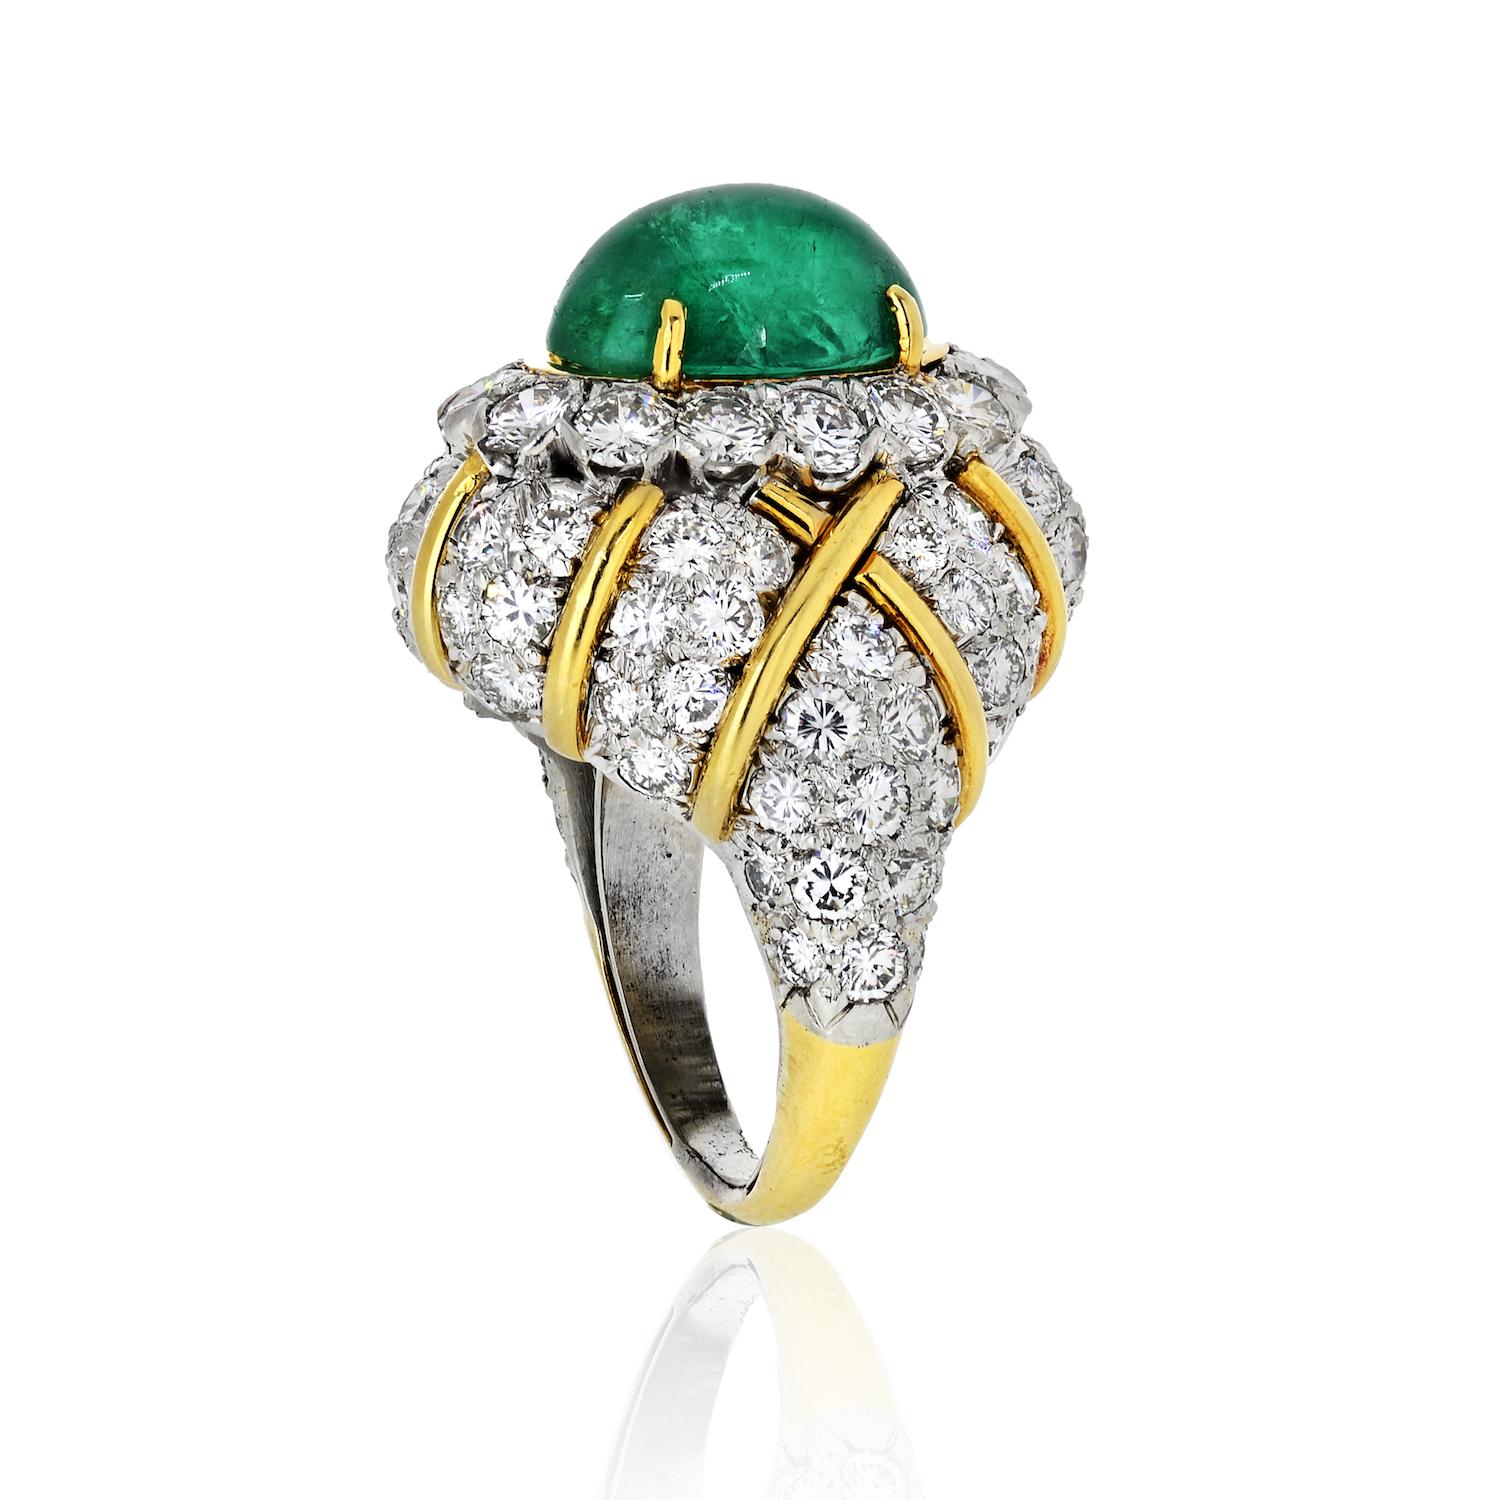 A deep hue green emerald cabochon set in an oval halo of round brilliant white diamonds is the focal point of this bombé cocktail ring, which features quilt-like crosshatching made of gold with pavé-set diamonds. Approx. 6.50cts of